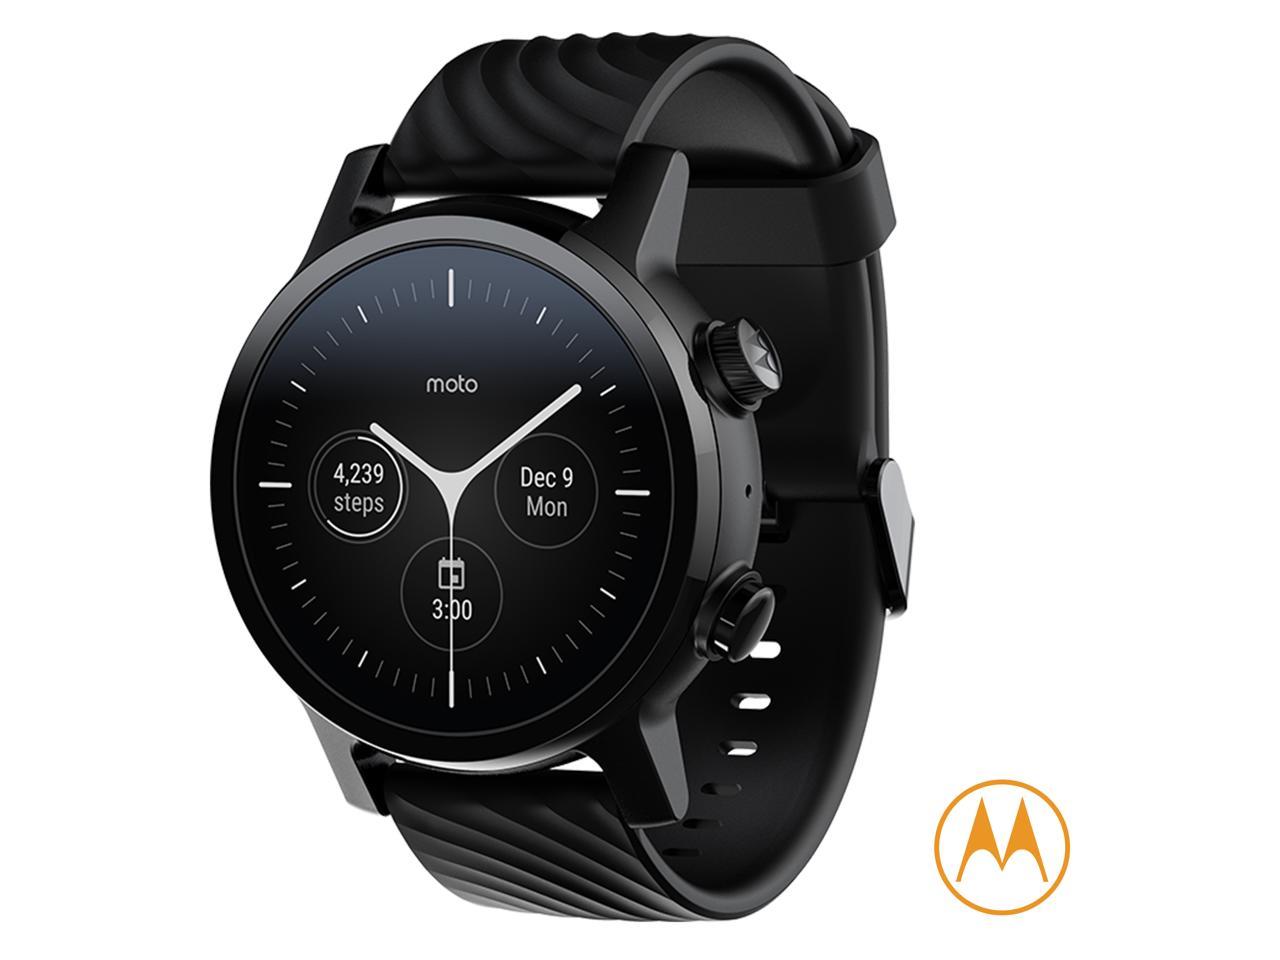 Motorola Moto 3rd Gen Smartwatch - Phantom Black Stainless Steel Case With 20mm Band, All-day Battery, WearOs, & coating for increased - Newegg.com